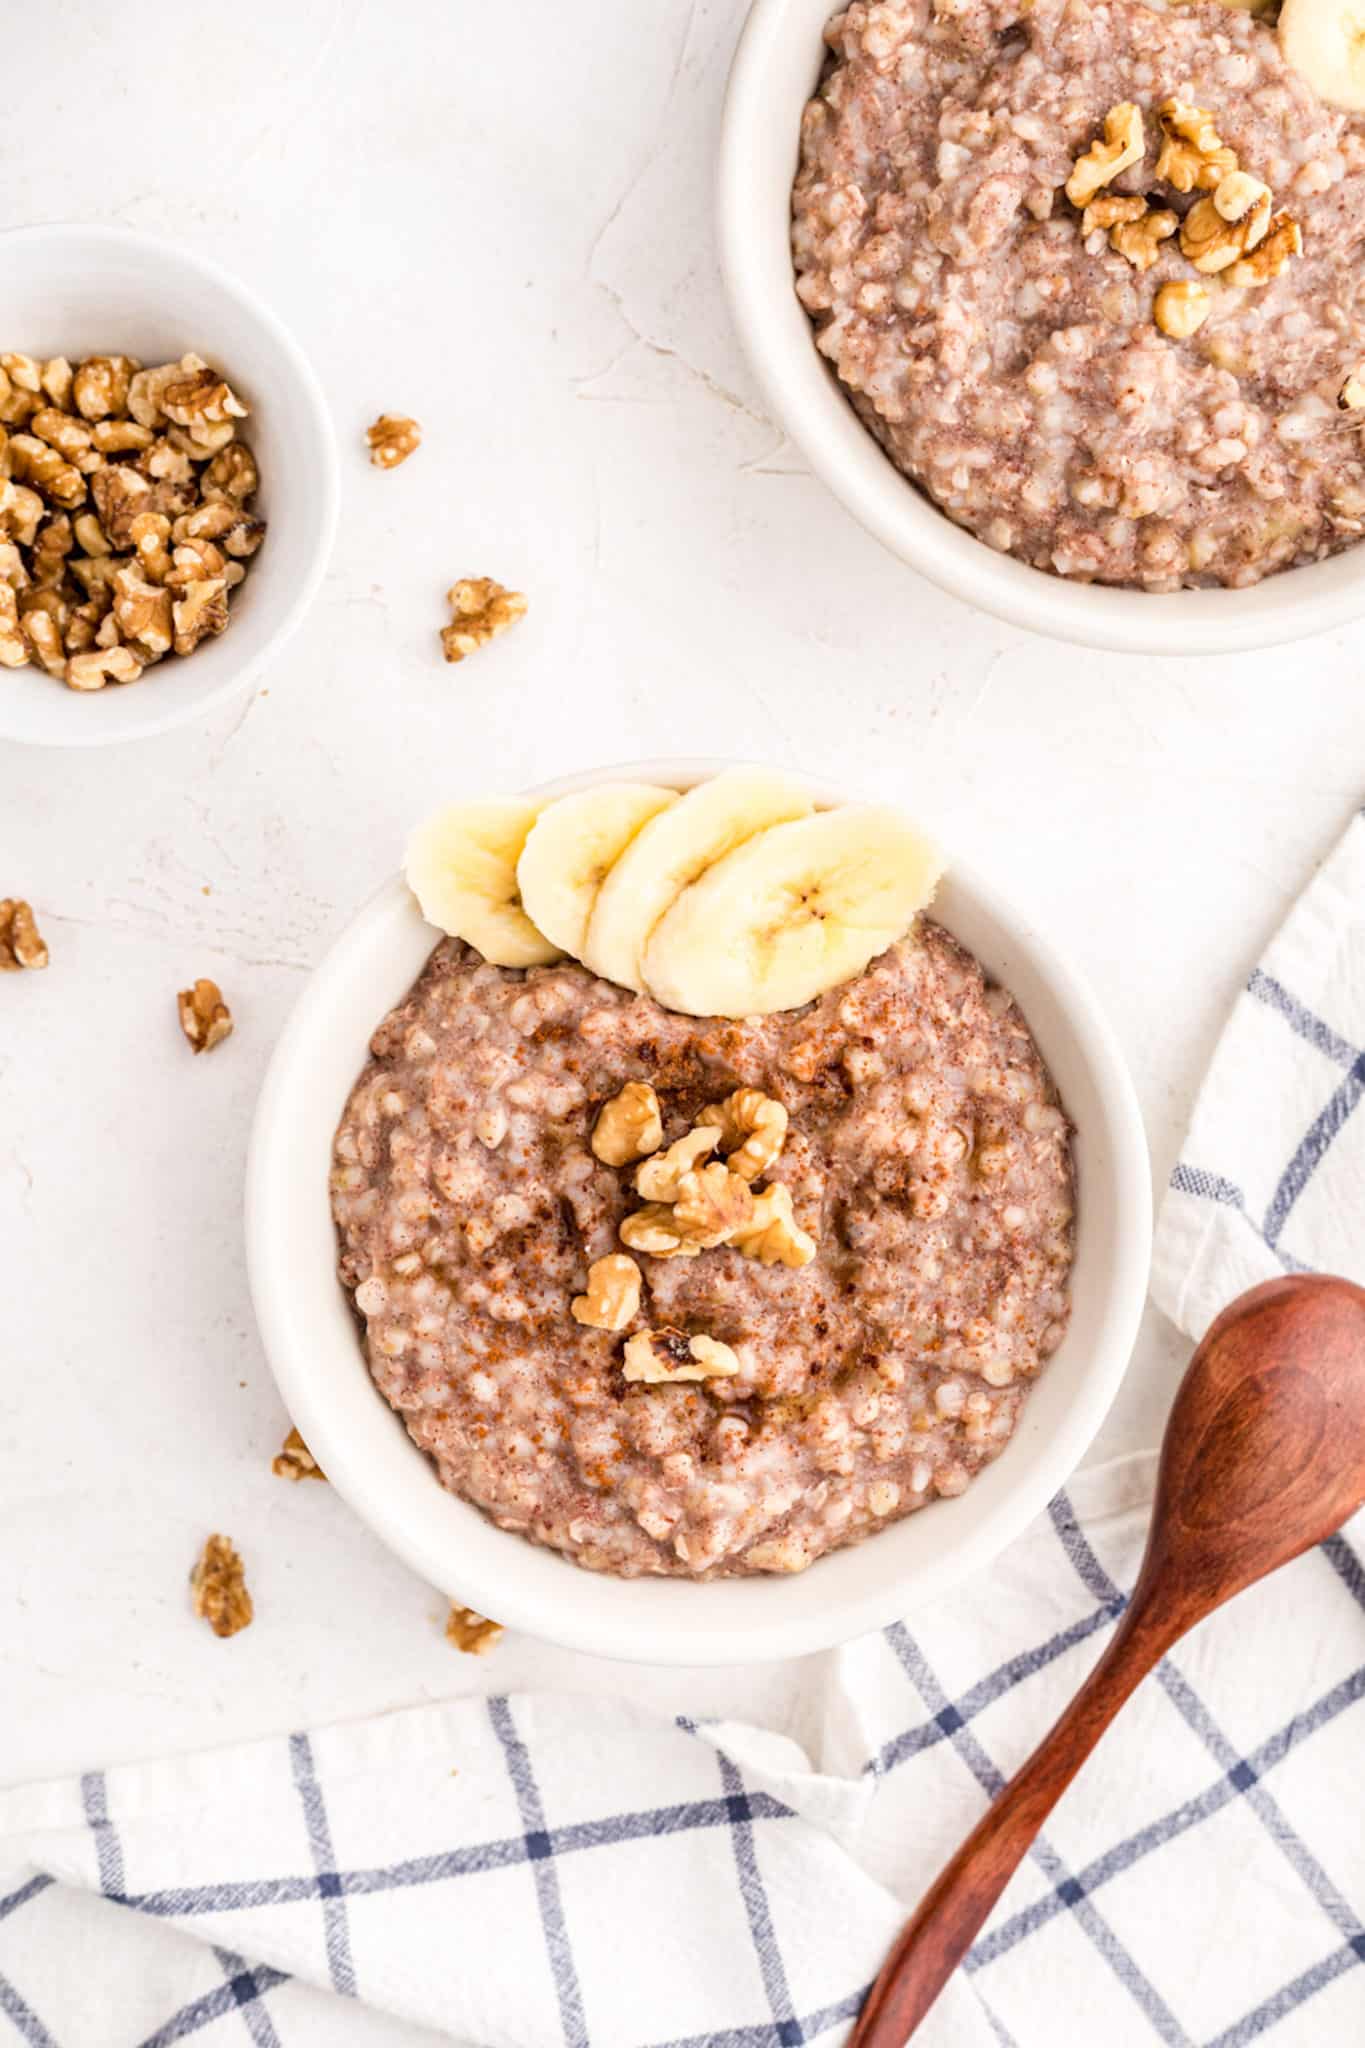 Two small bowls of buckwheat porridge topped with bananas and walnuts.